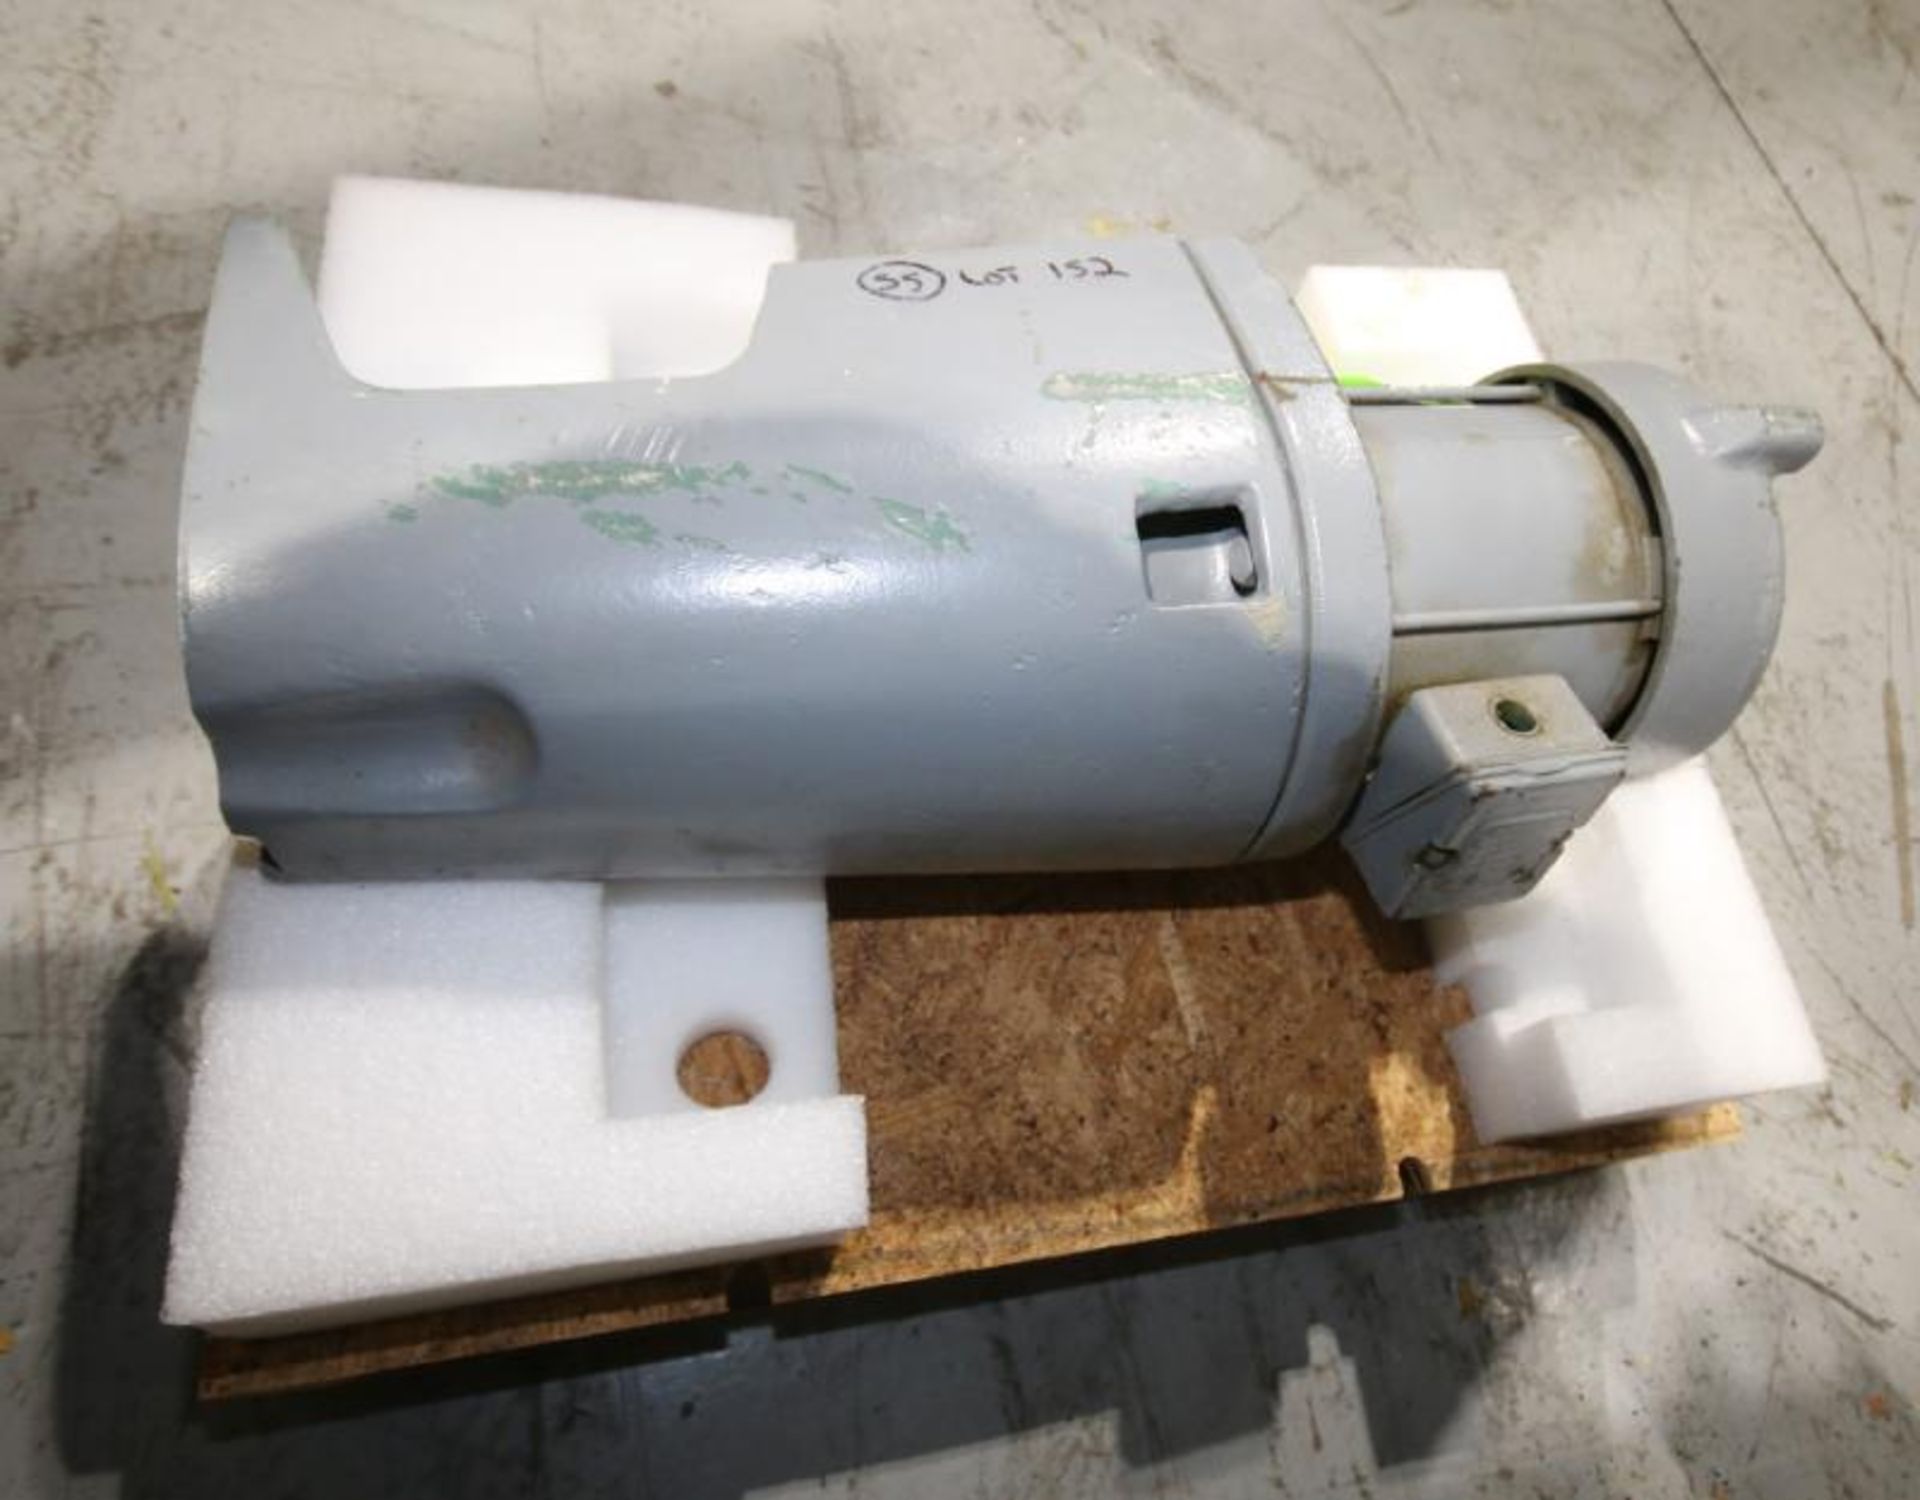 Lightnin Agitator Drive Motor, 1 hp / 1150 RPM, 230 - 460V 3 Phase (Located at the MDG Showroom in - Image 2 of 2